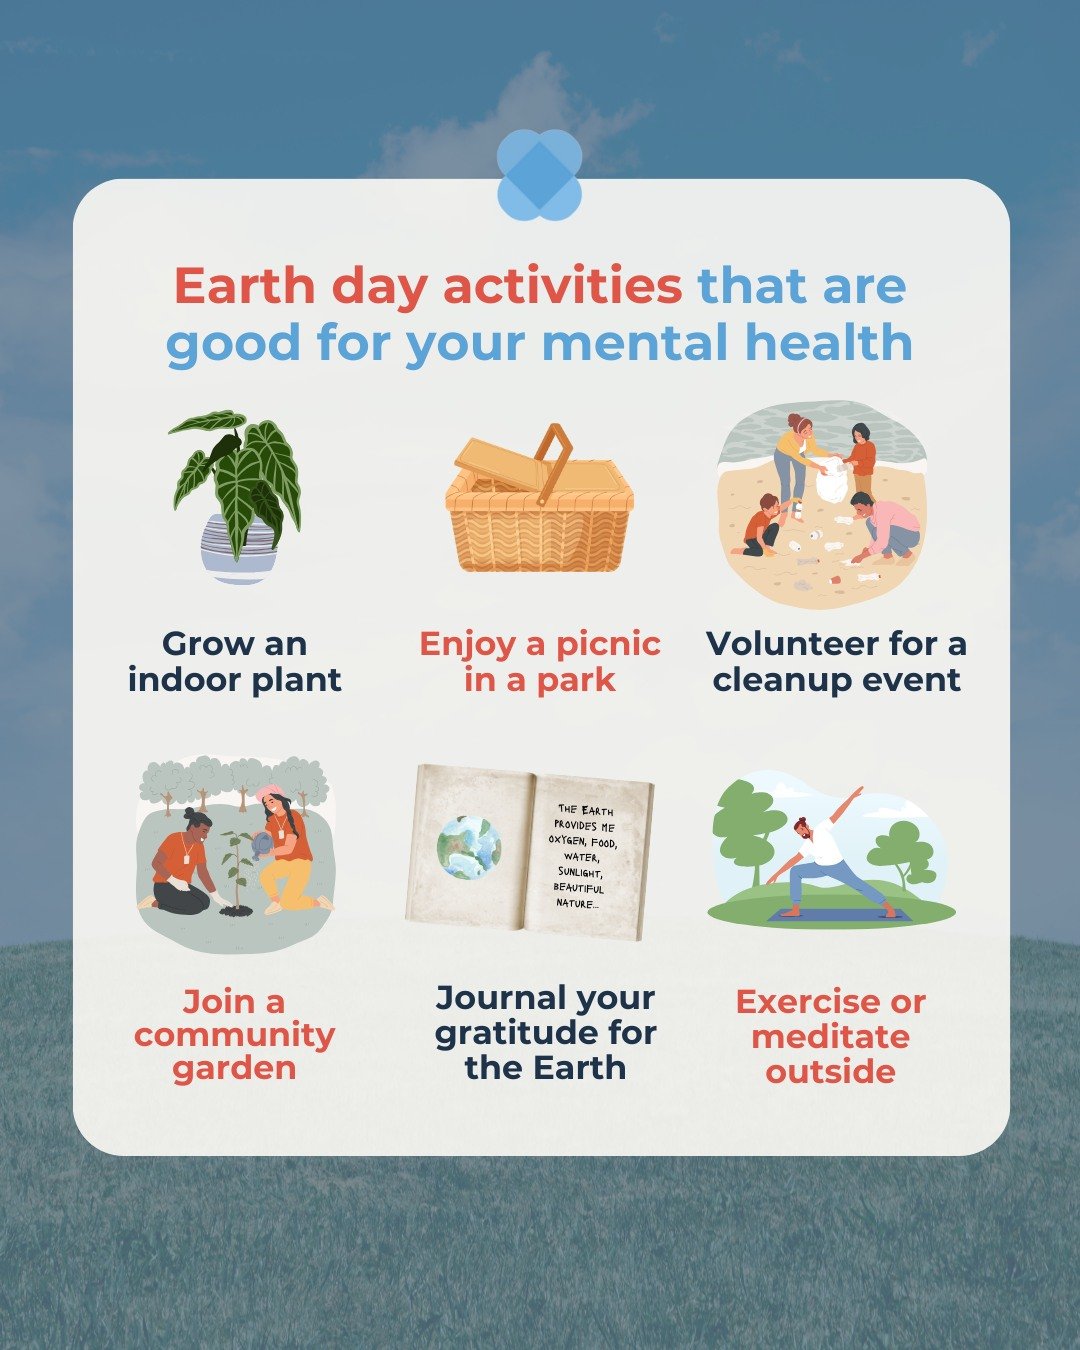 Boost your mental well-being this Earth Day with these uplifting activities! 🌍🌱

Let's celebrate our planet while nurturing our minds! 💚 What are your plans for Earth Day? 💬 #EarthDay 
.
.
.
.
#mentalhealthadvocate #mentalhealthtips #advocacy #th